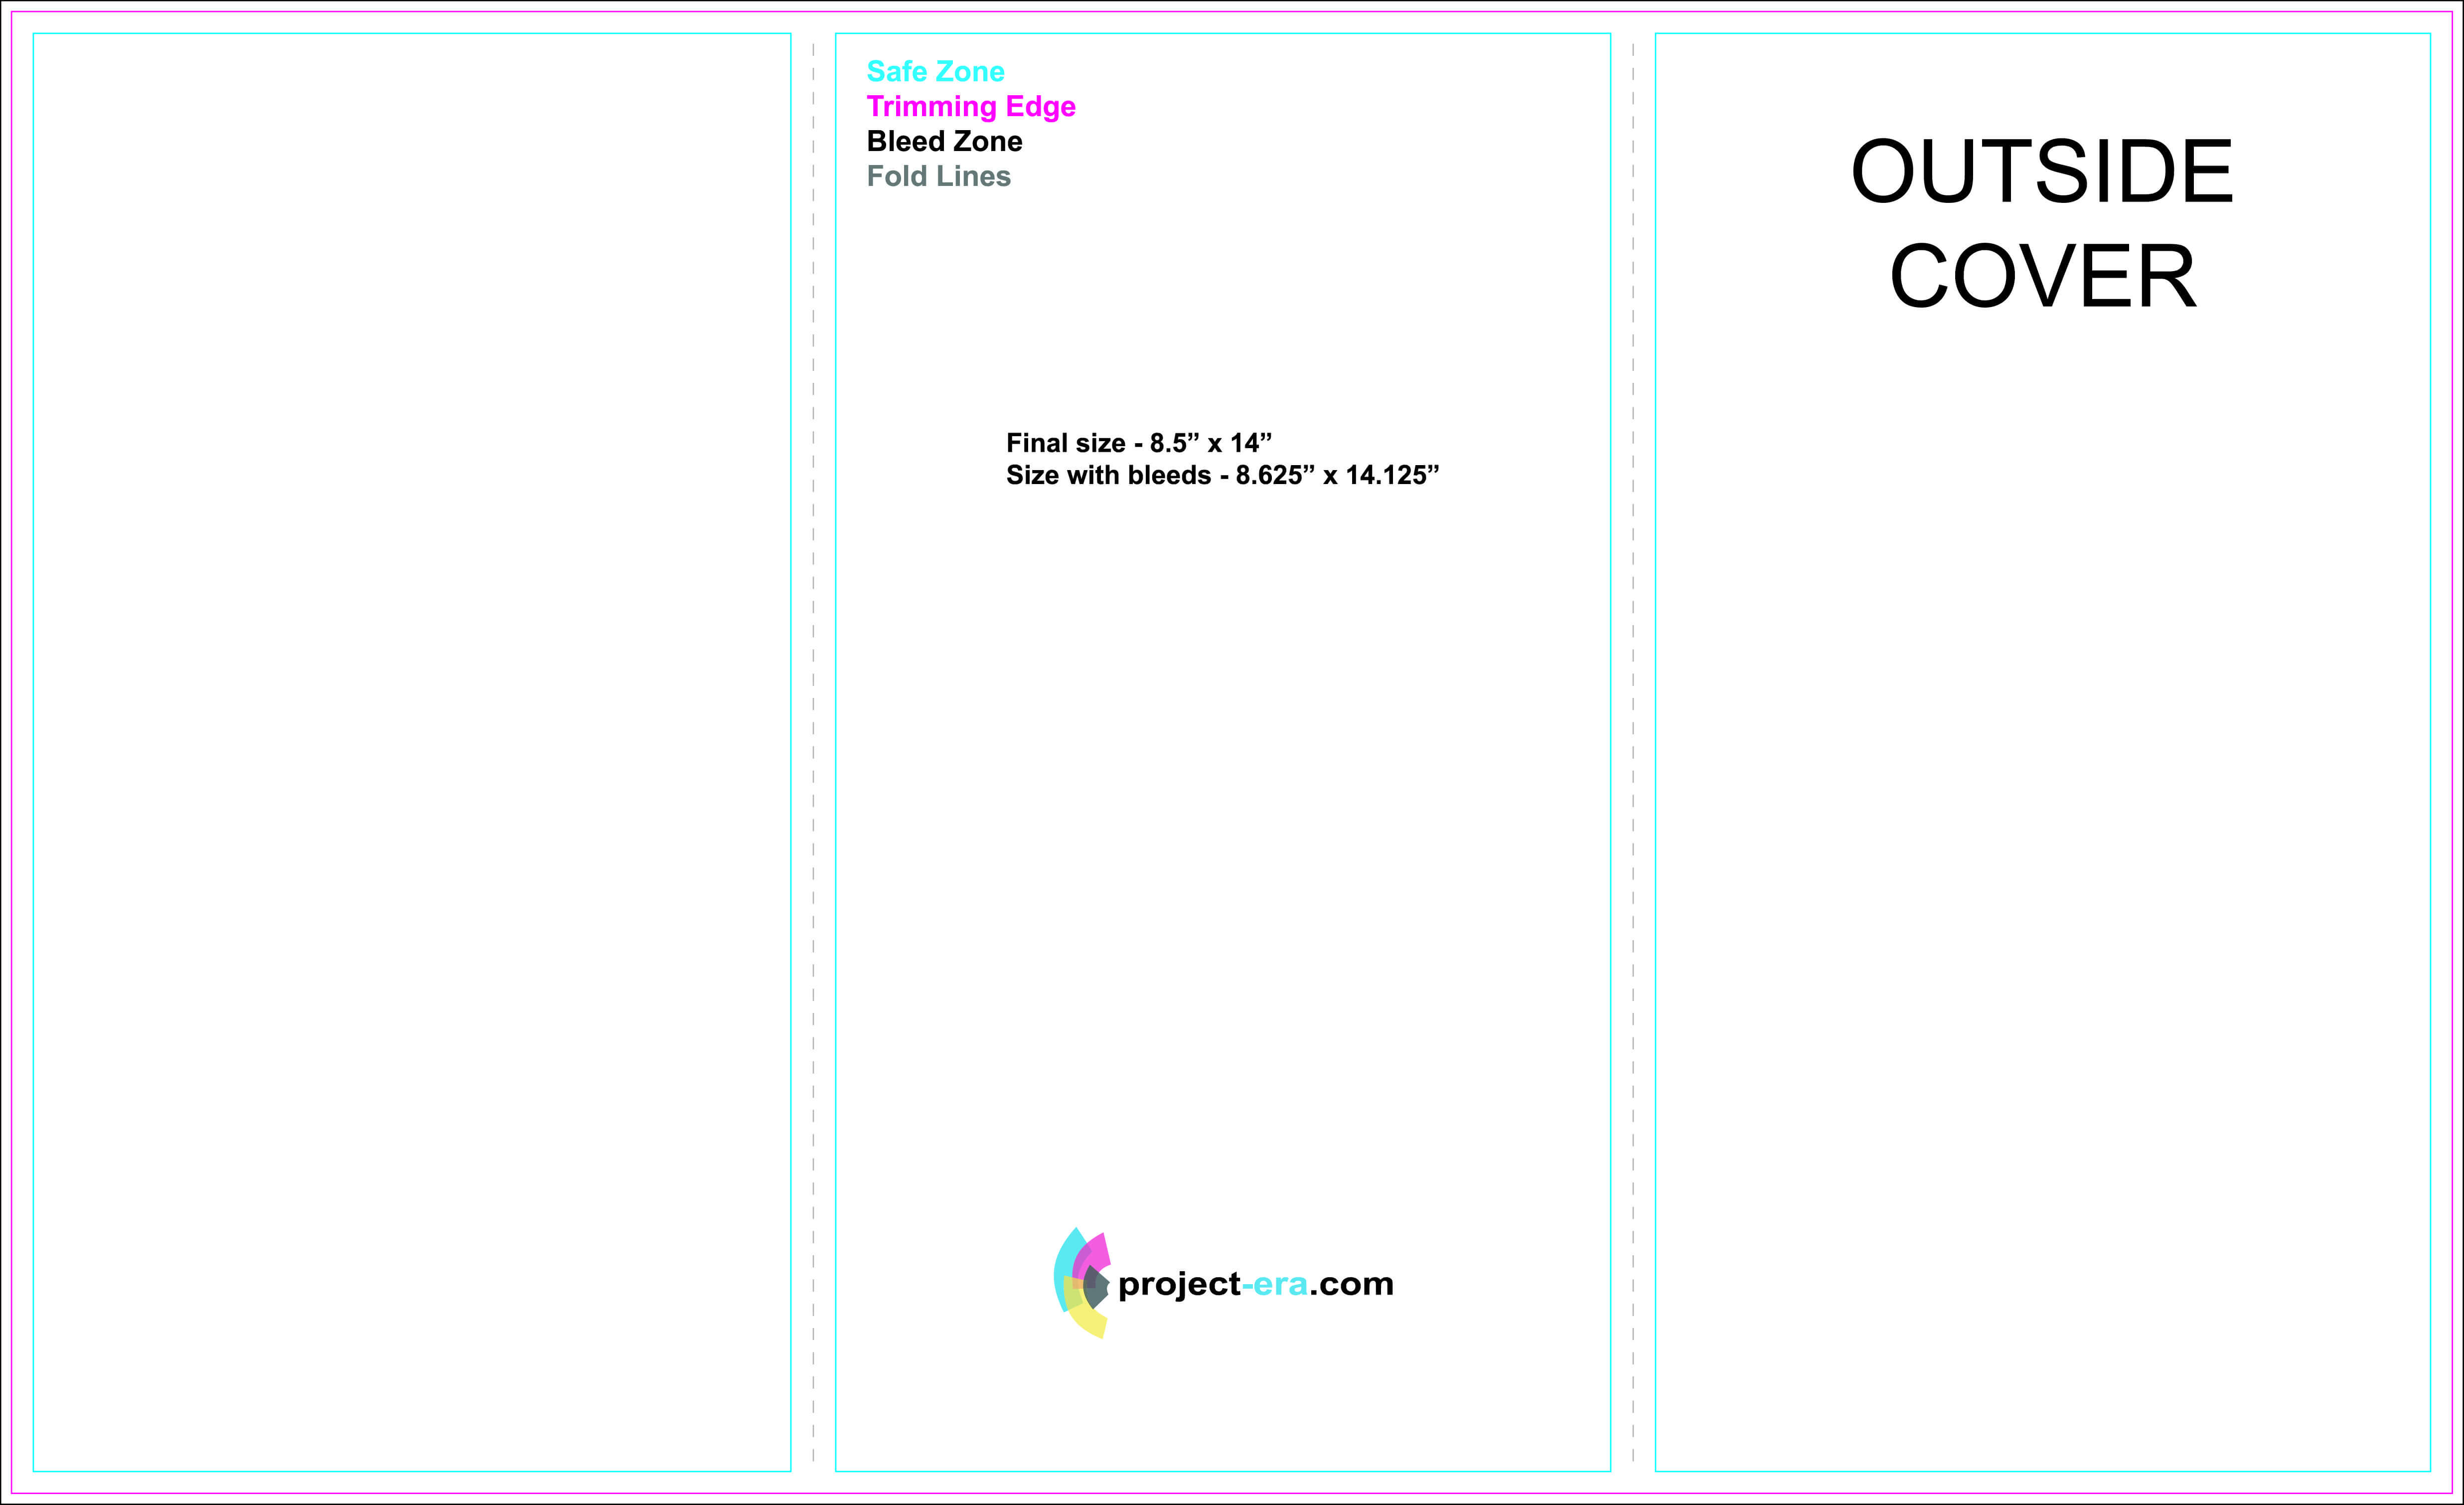 Free Tri Fold Brochure Templates Based On 8.5" X 14" Paper For Brochure Folding Templates